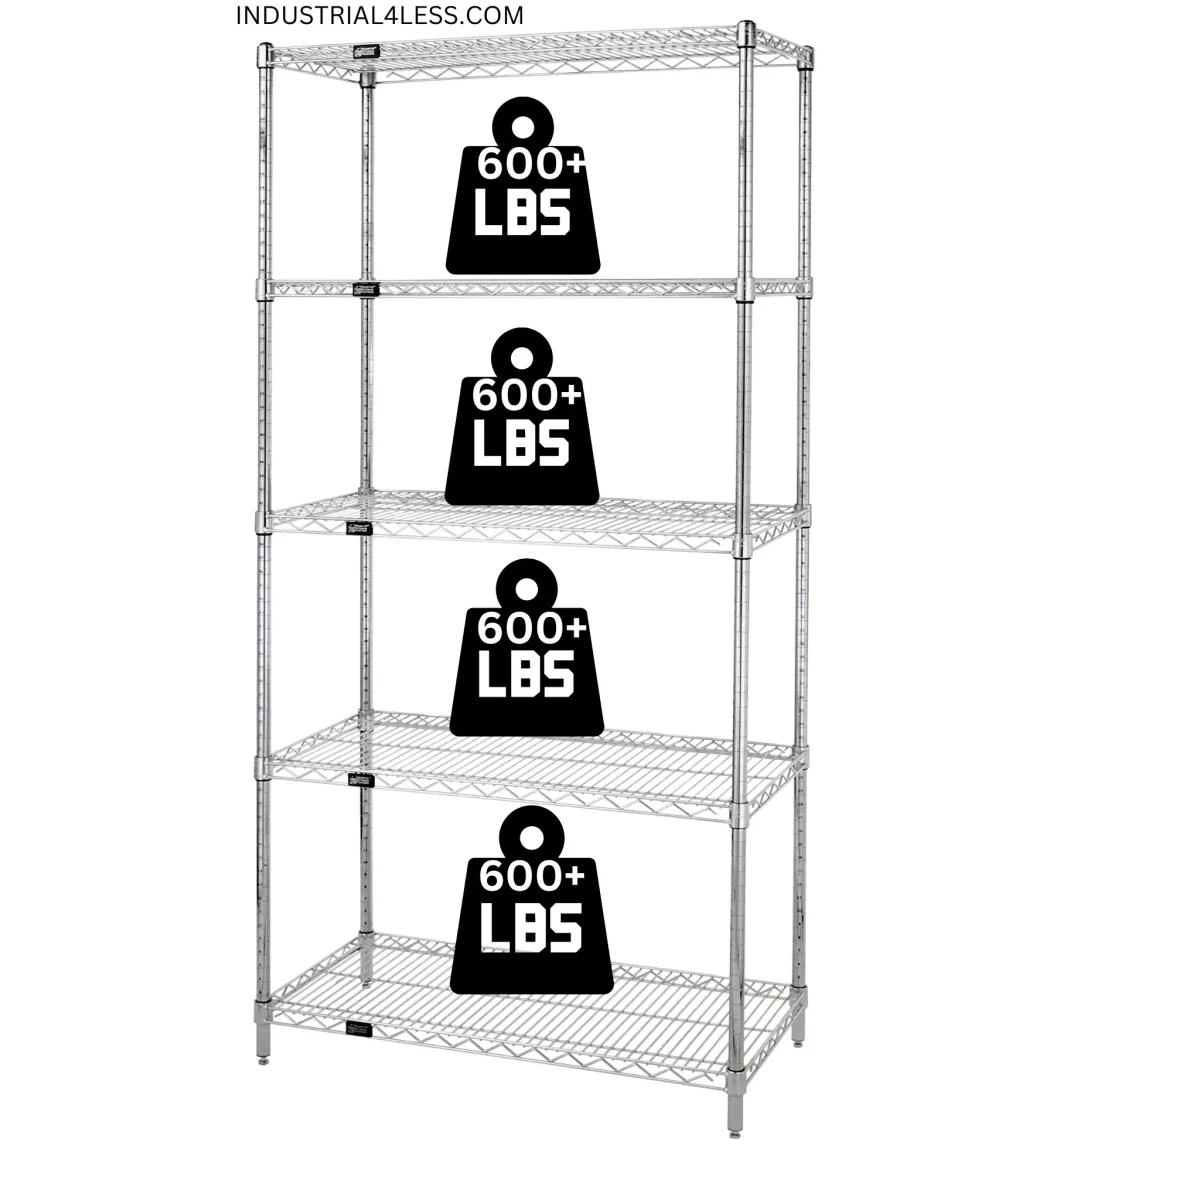 14" x 54" Stainless Steel Wire Shelving Unit - Industrial 4 Less - 14545S-5